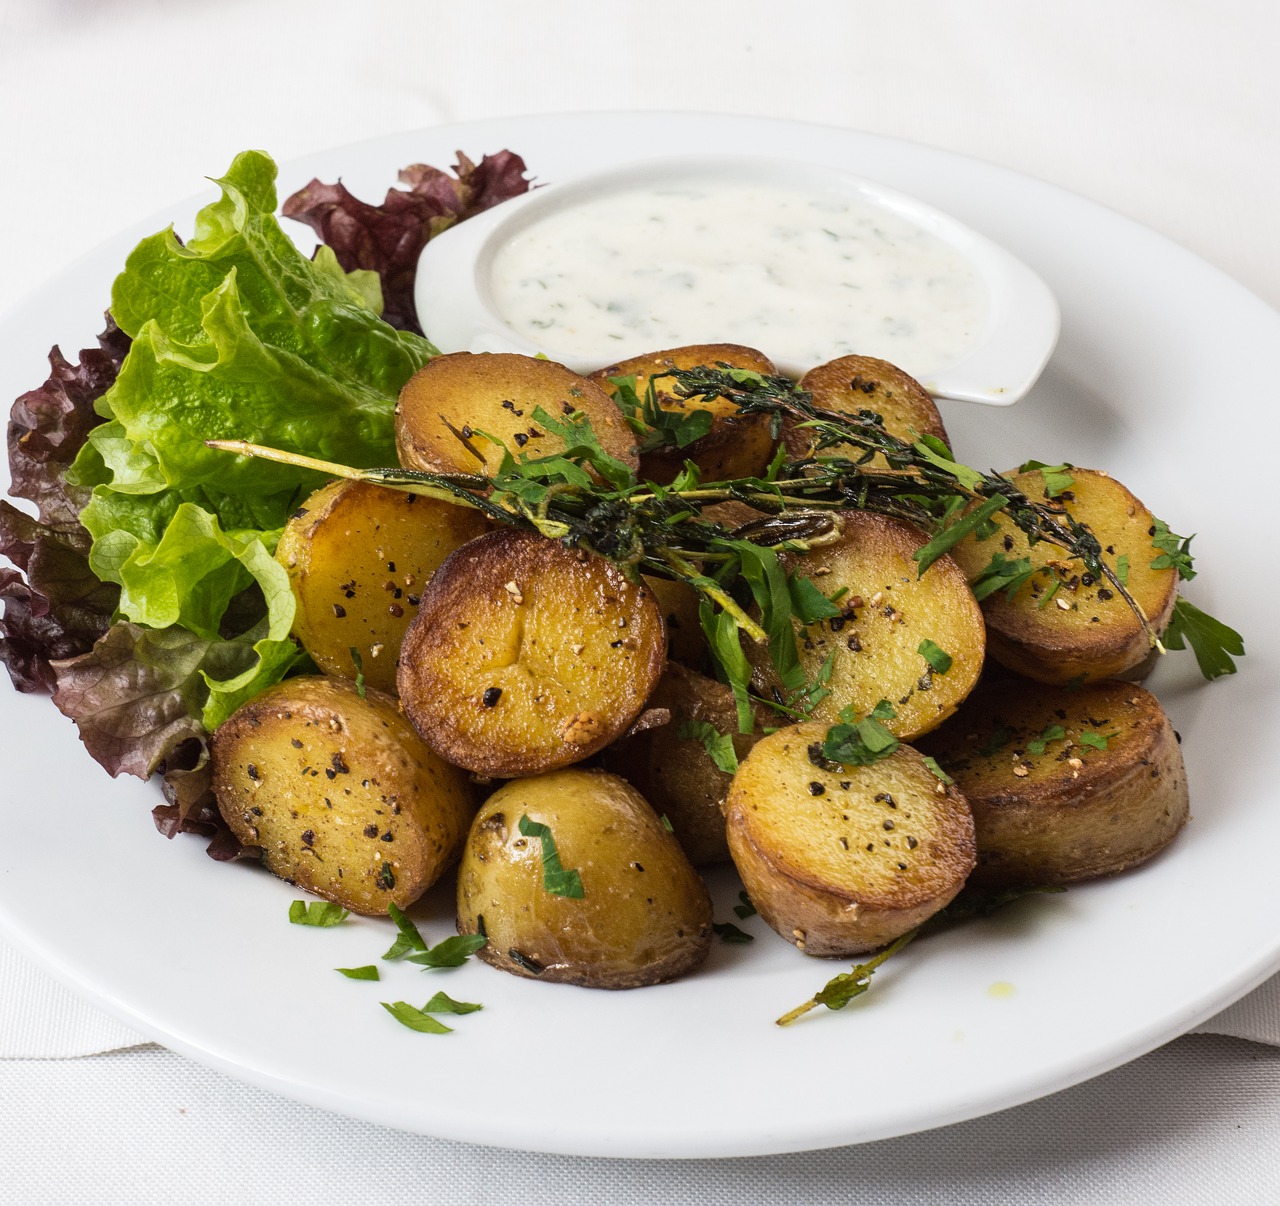 Baked Potatoes With Chive Sauce